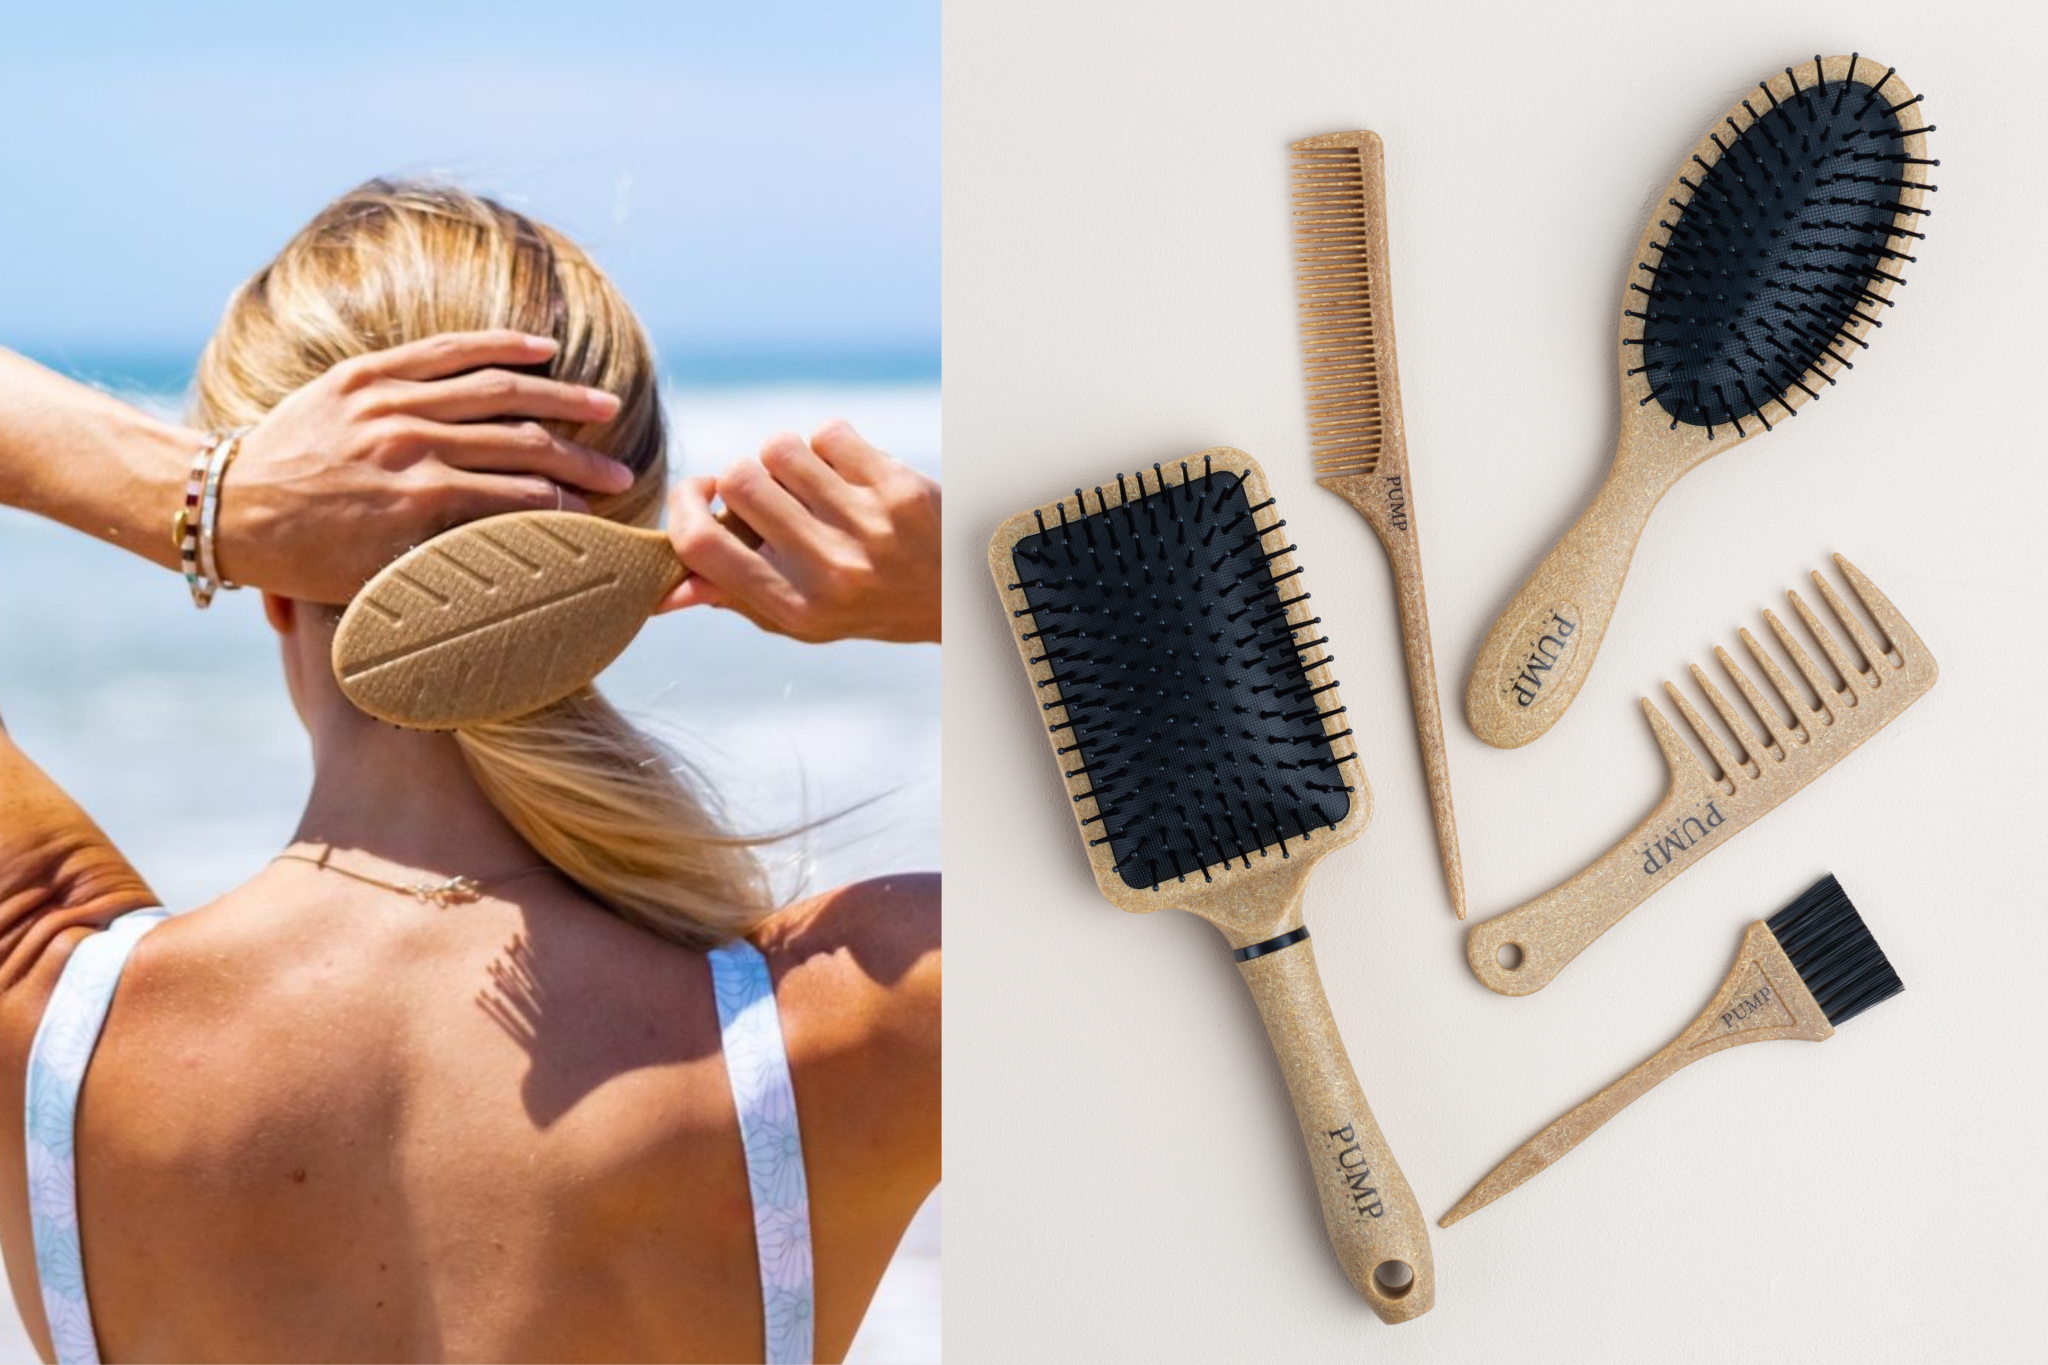 How to Clean a Hairbrush: Step-by-Step Guide